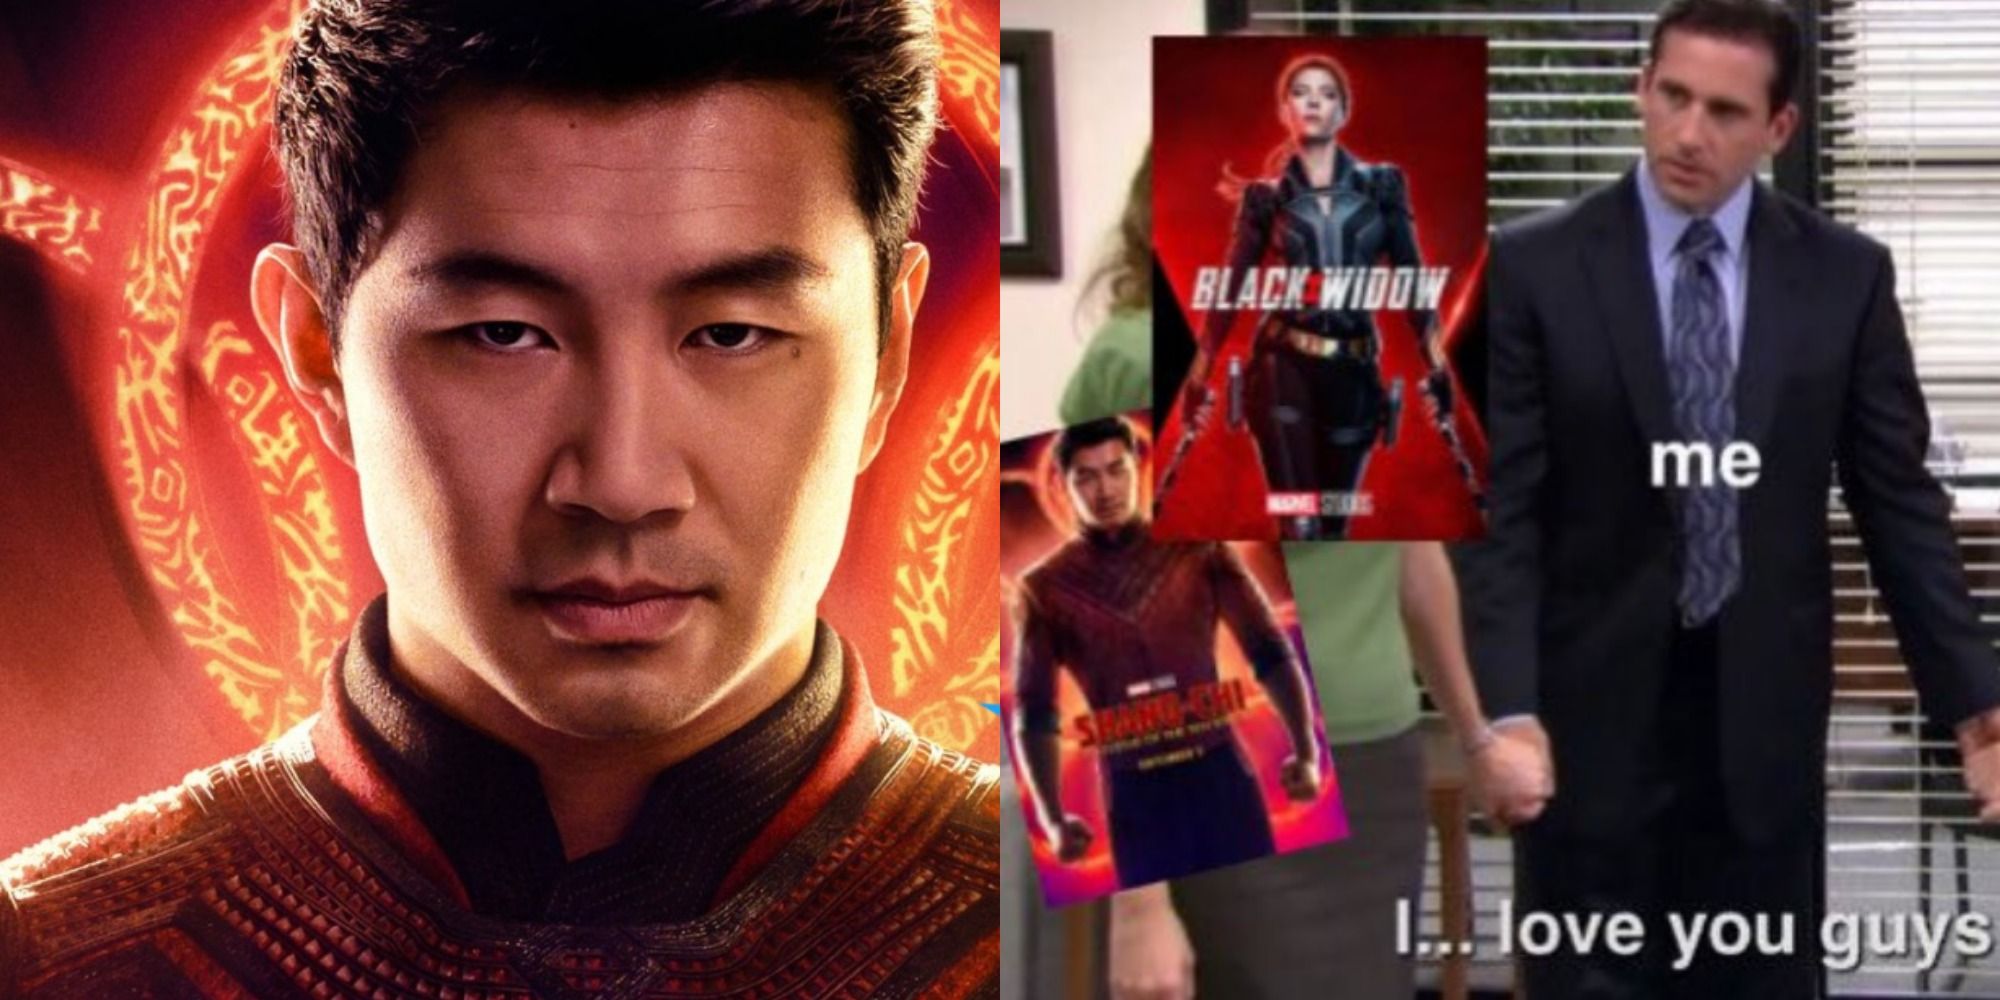 Split image of Shang Chi poster and Office meme